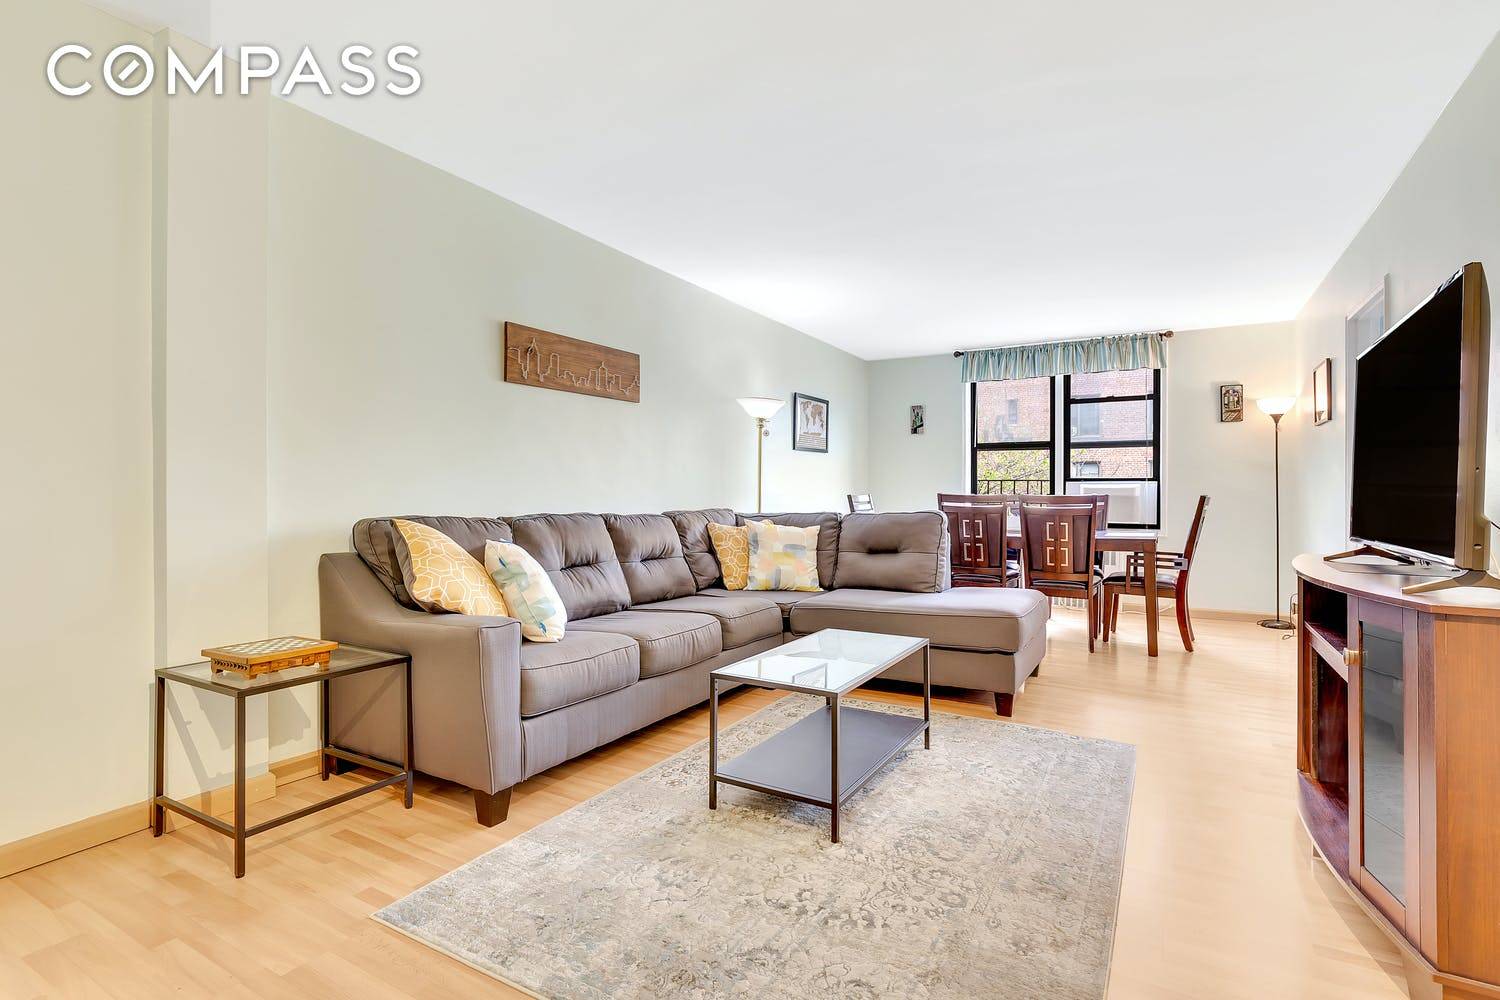 Welcome home to the Nebraska, a well maintained Post war, elevatored Co op with low maintenance cost sits on a quiet block next to Forest Hills Gardens.